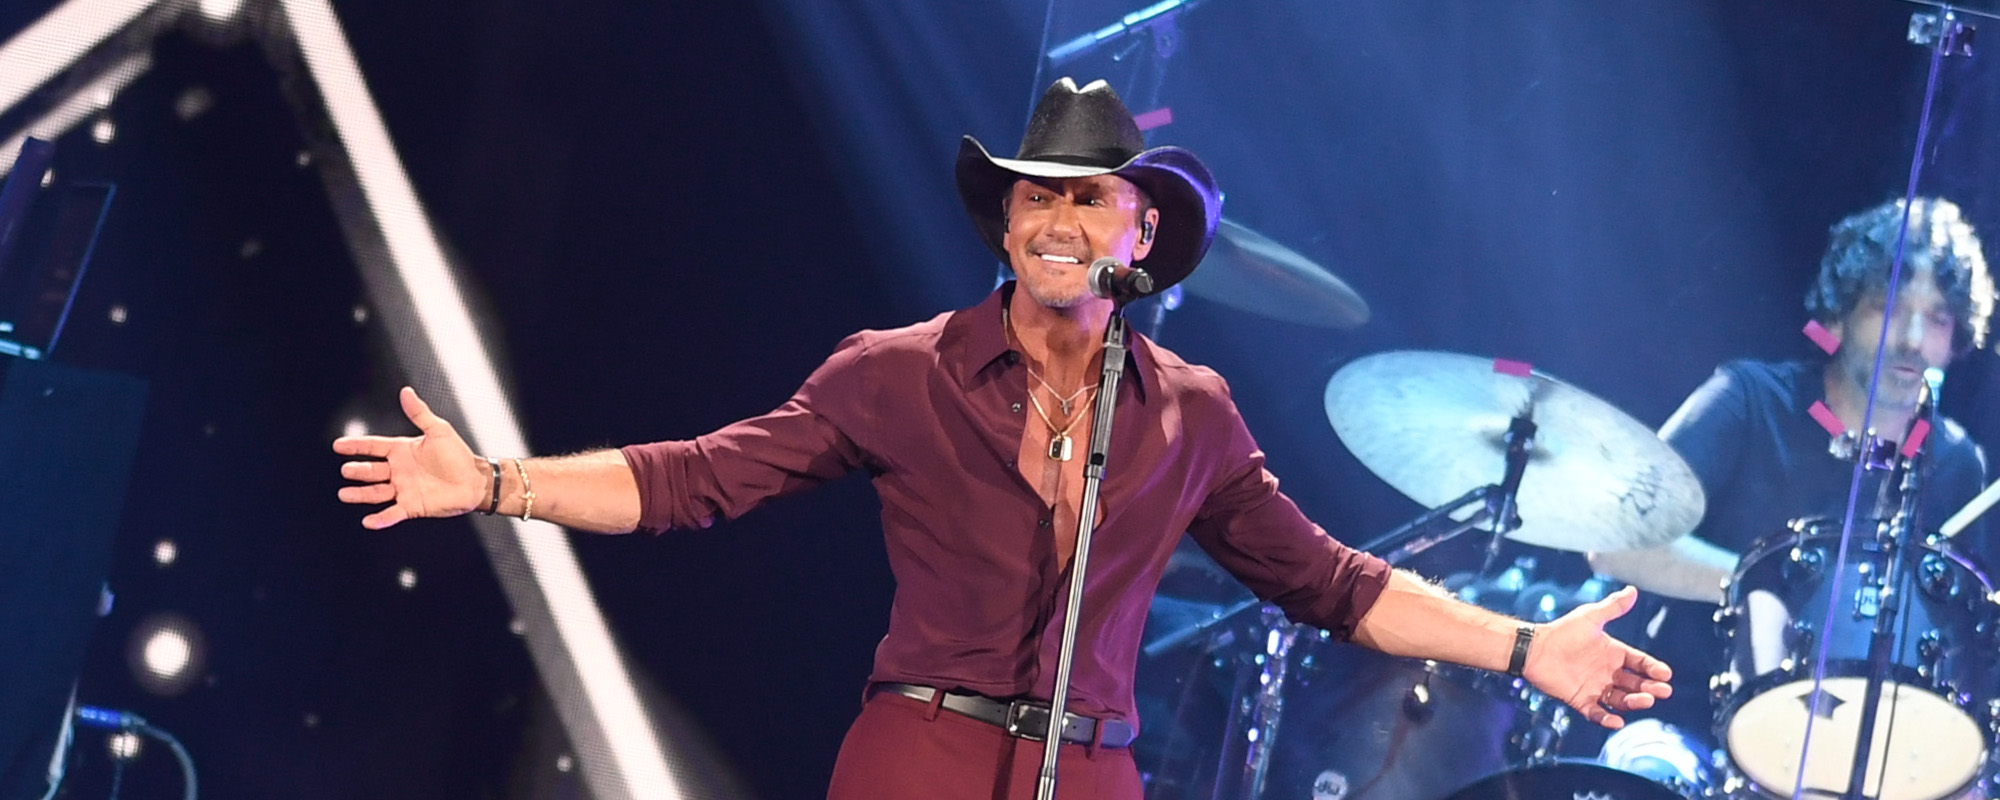 Tim McGraw Adds Standing Room Only Tour Dates